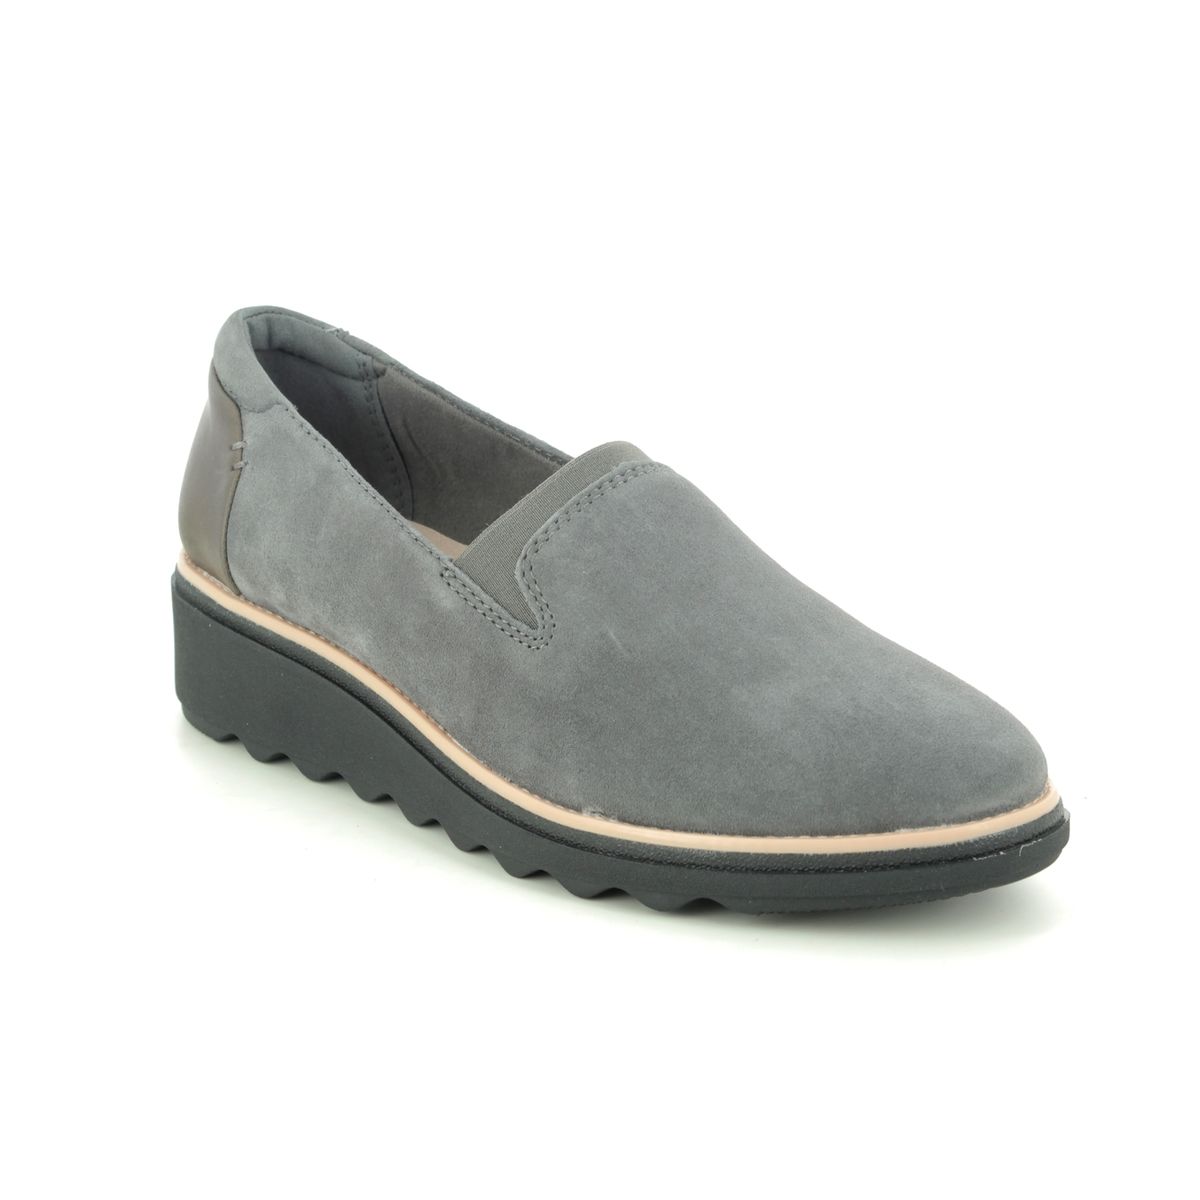 sharon dolly suede wedge loafer